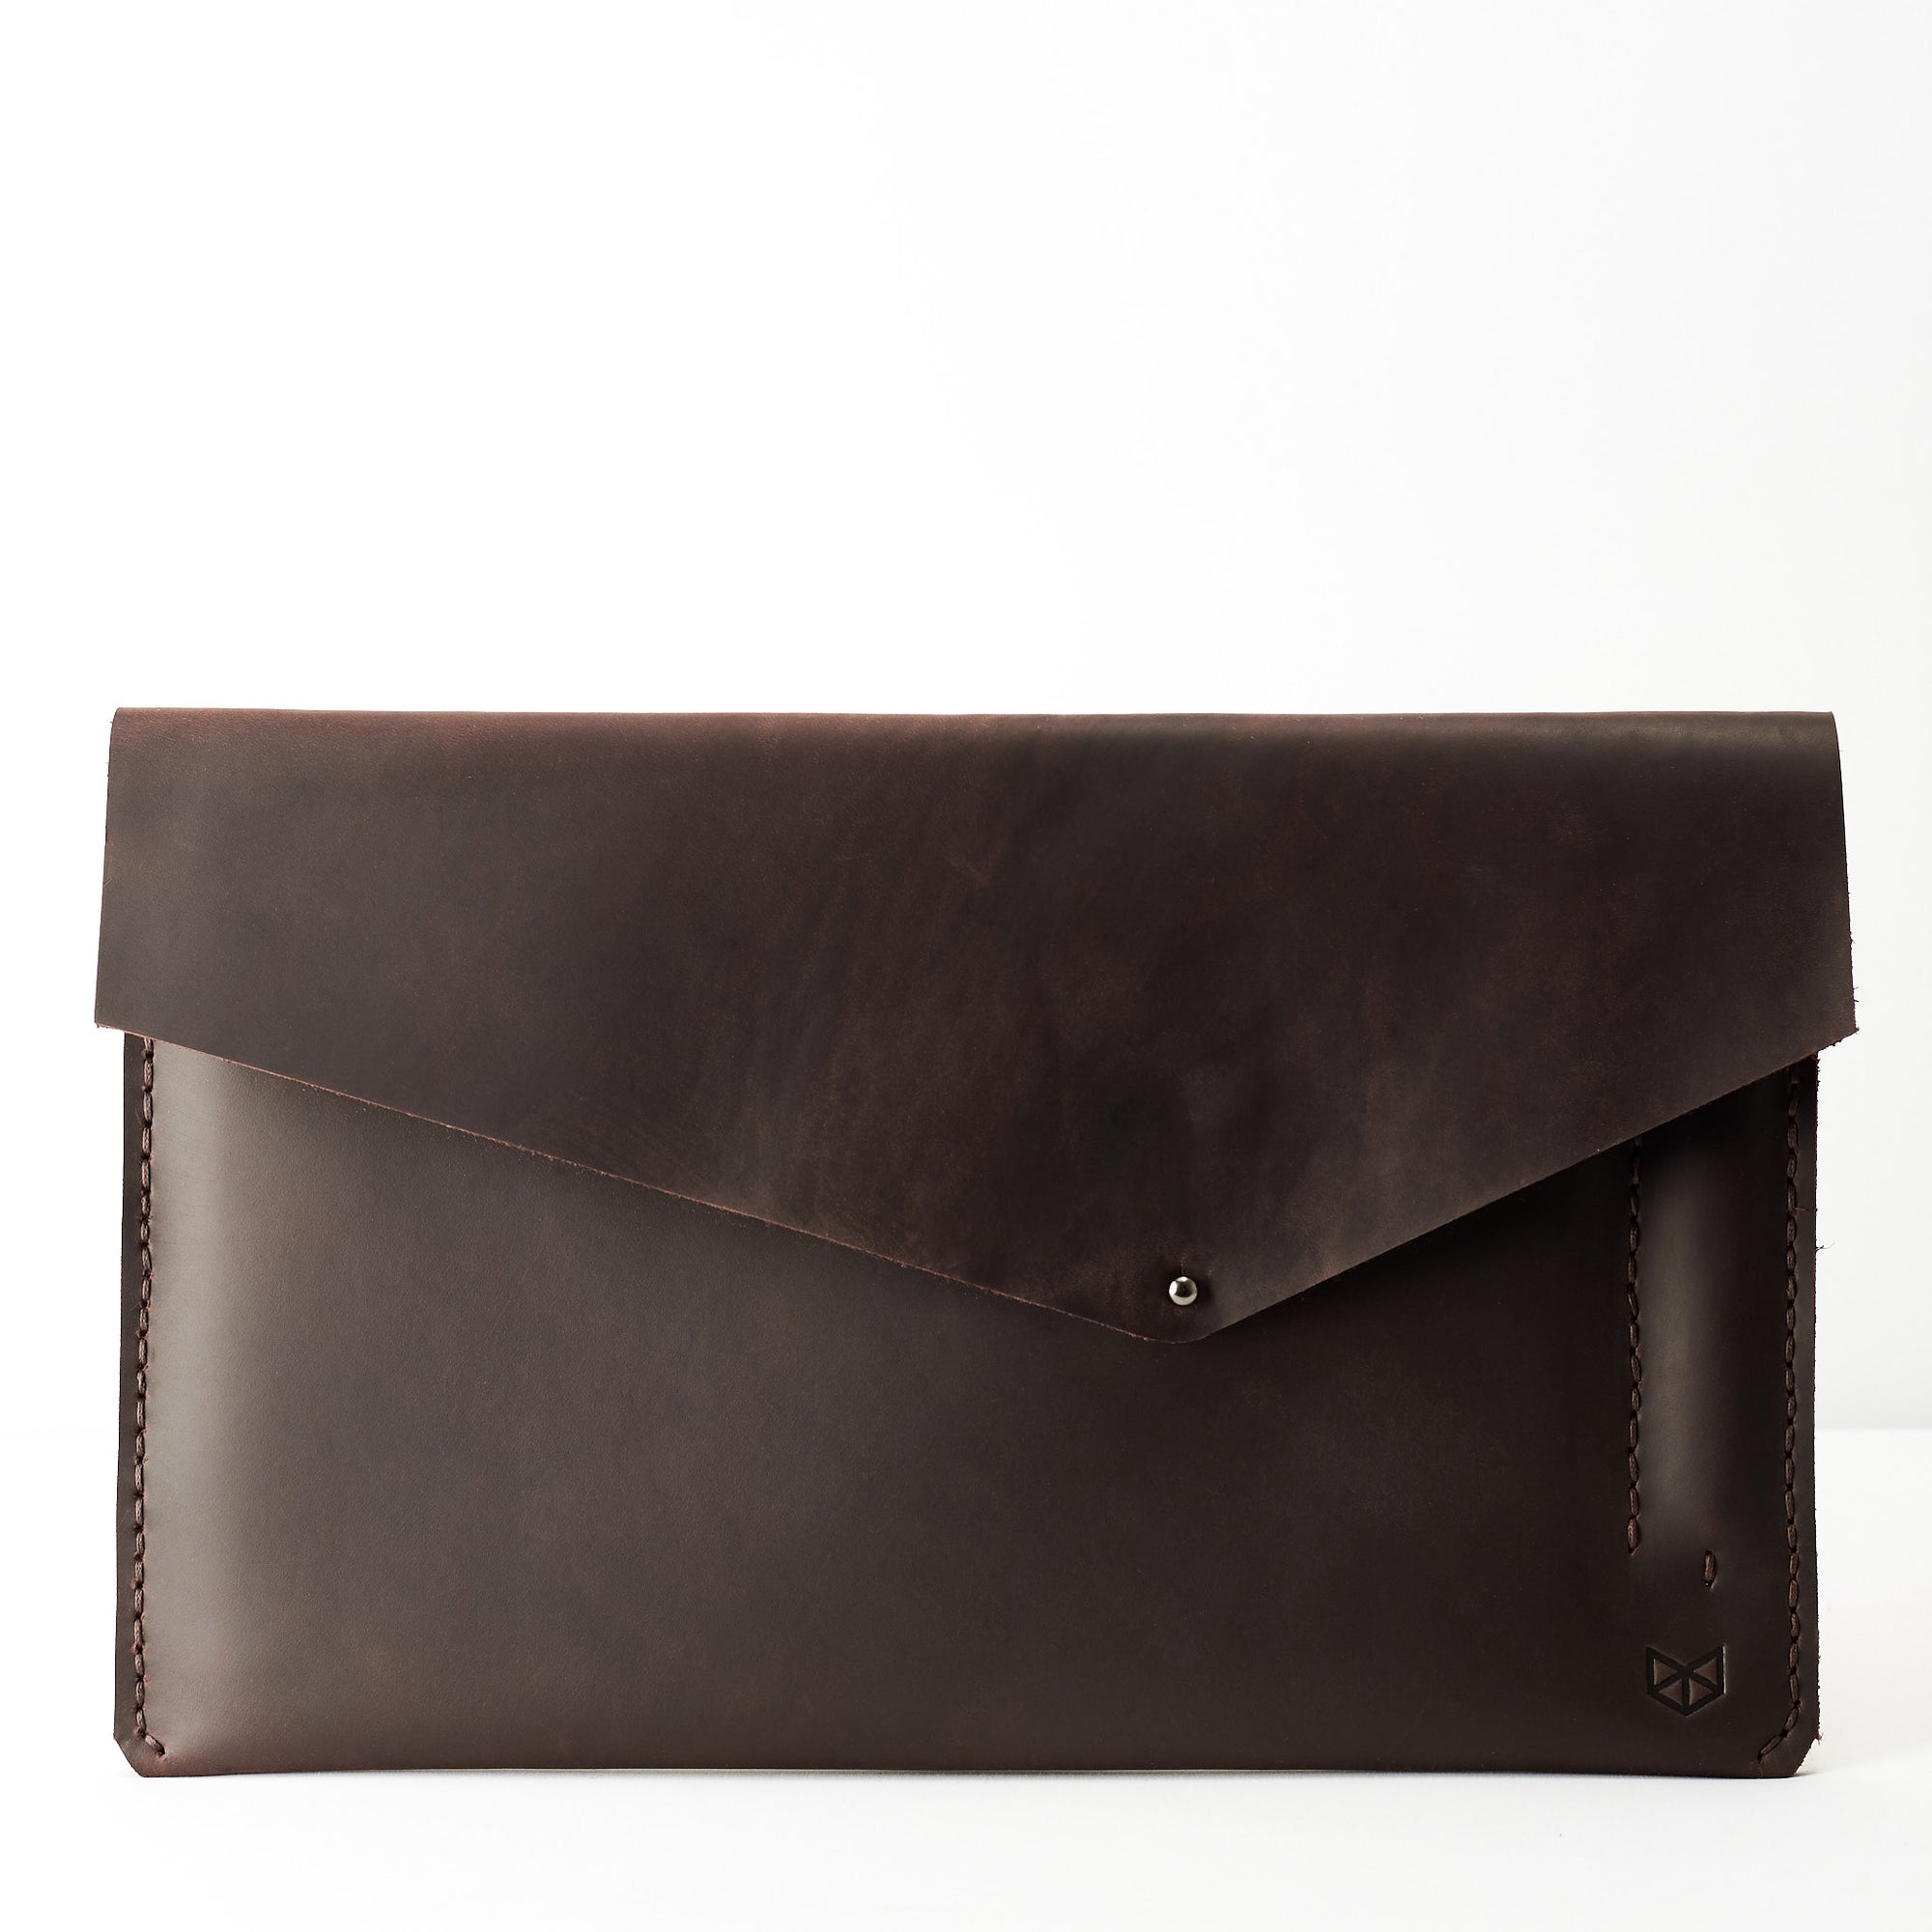 Dark brown leather sleeve for Pixel Slate. Mens gifts